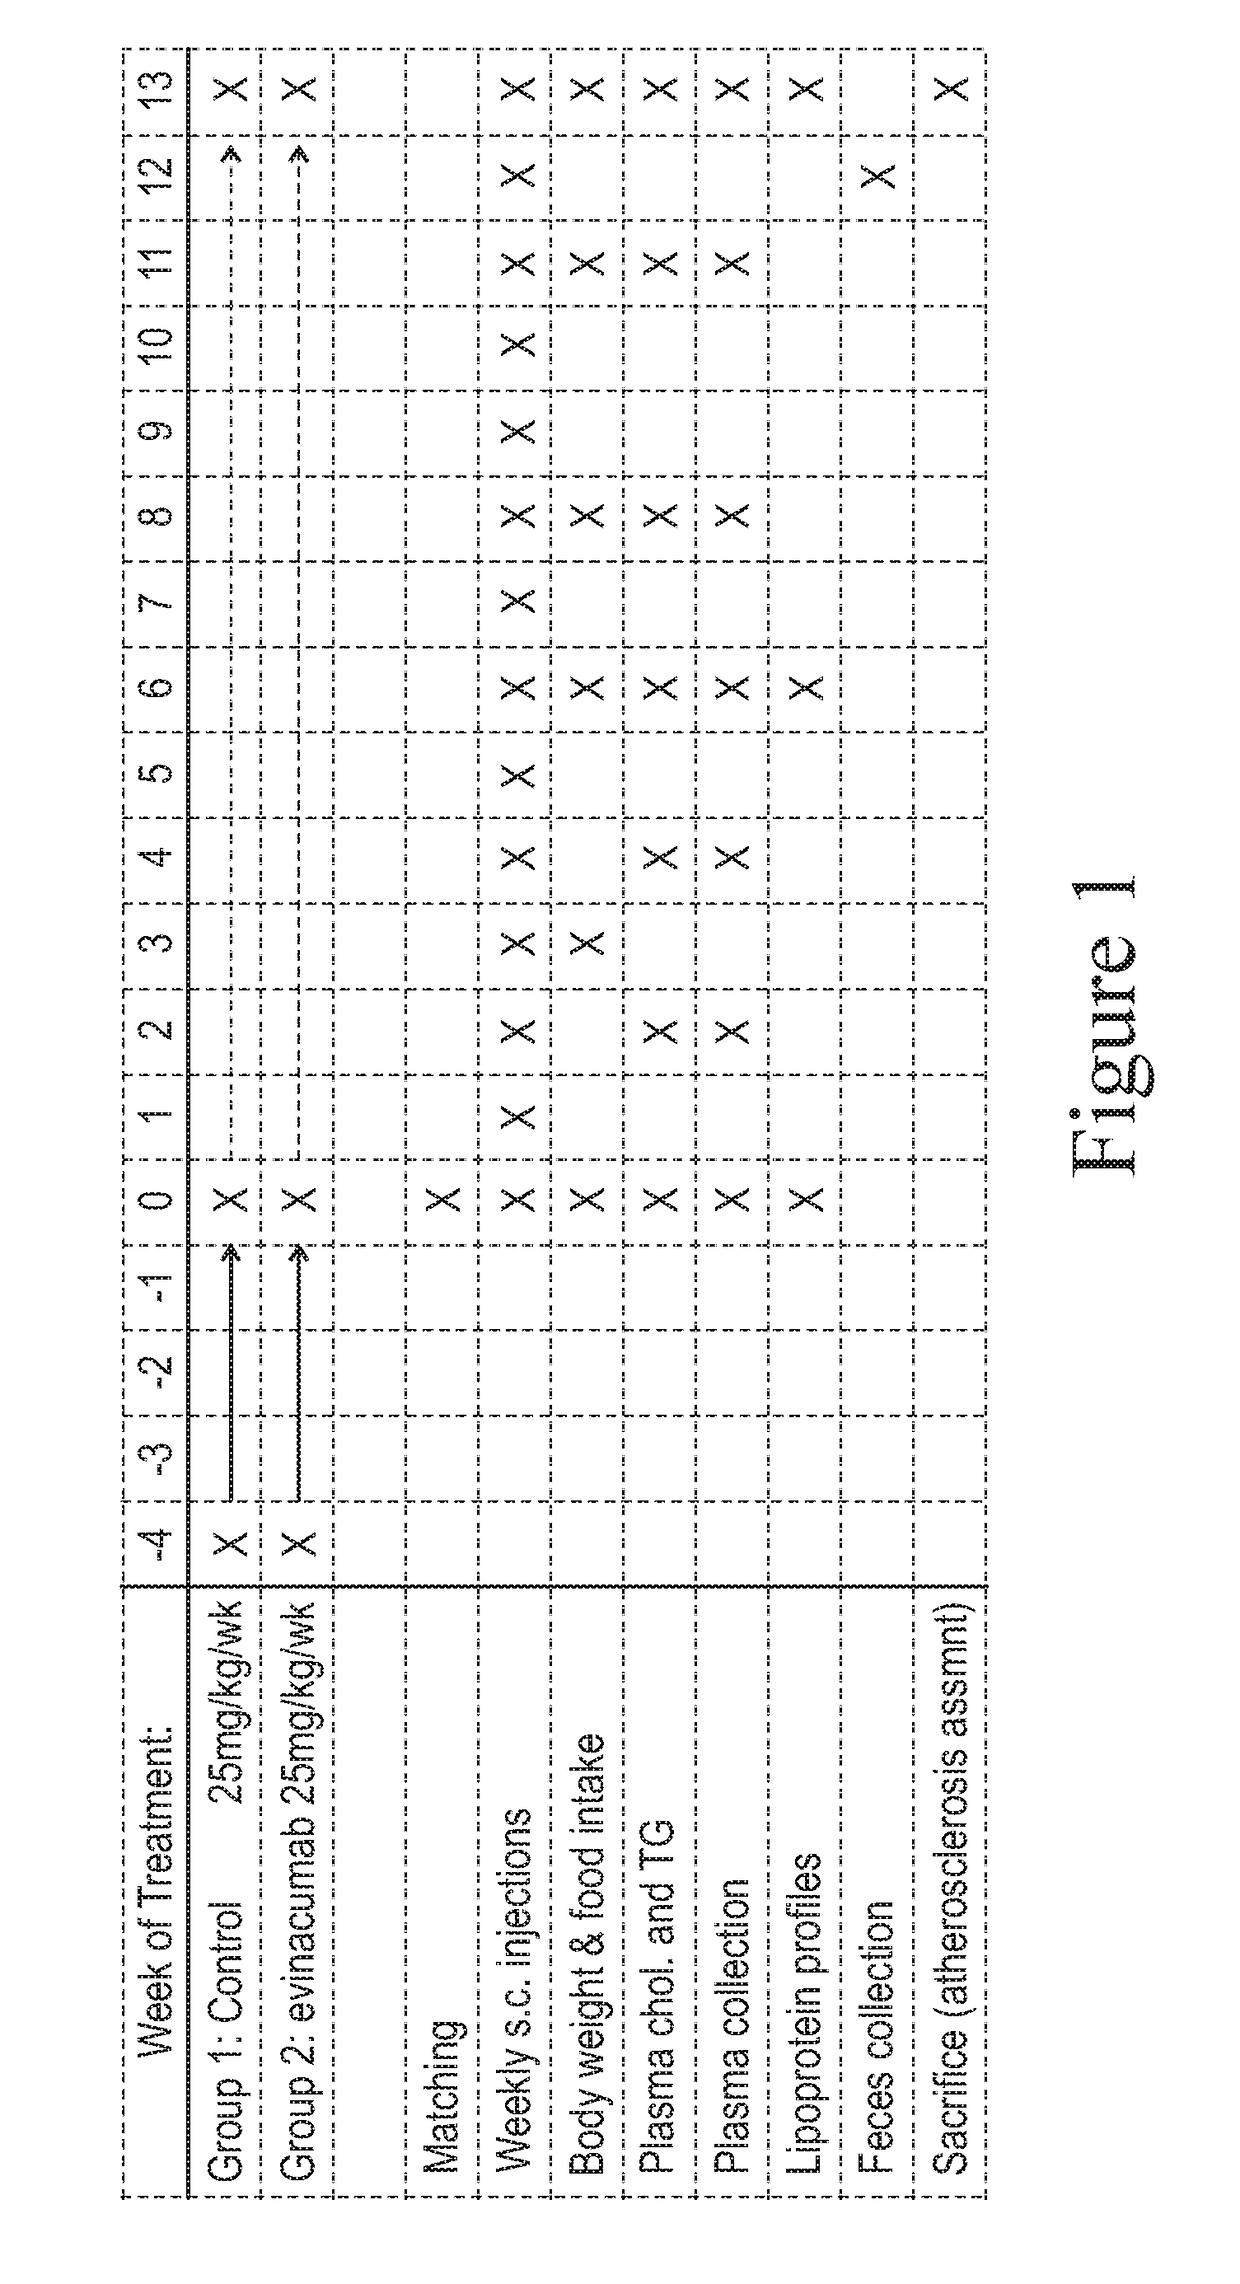 Methods for Treating or Preventing Atherosclerosis by Administering an Inhibitor of ANGPTL3